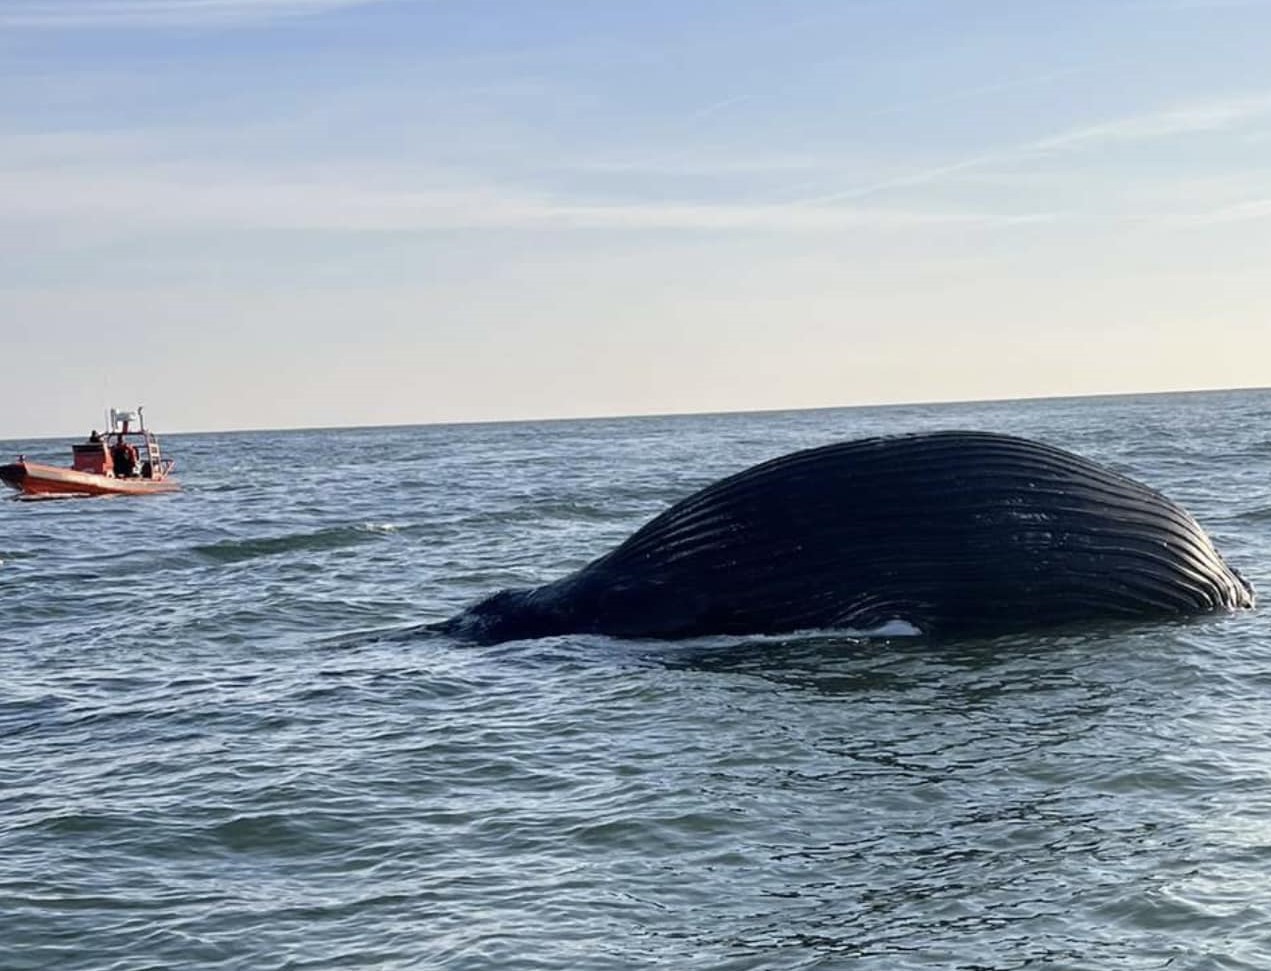 Latest Dead Humpback Whale Found Floating Near Mouth of Bay